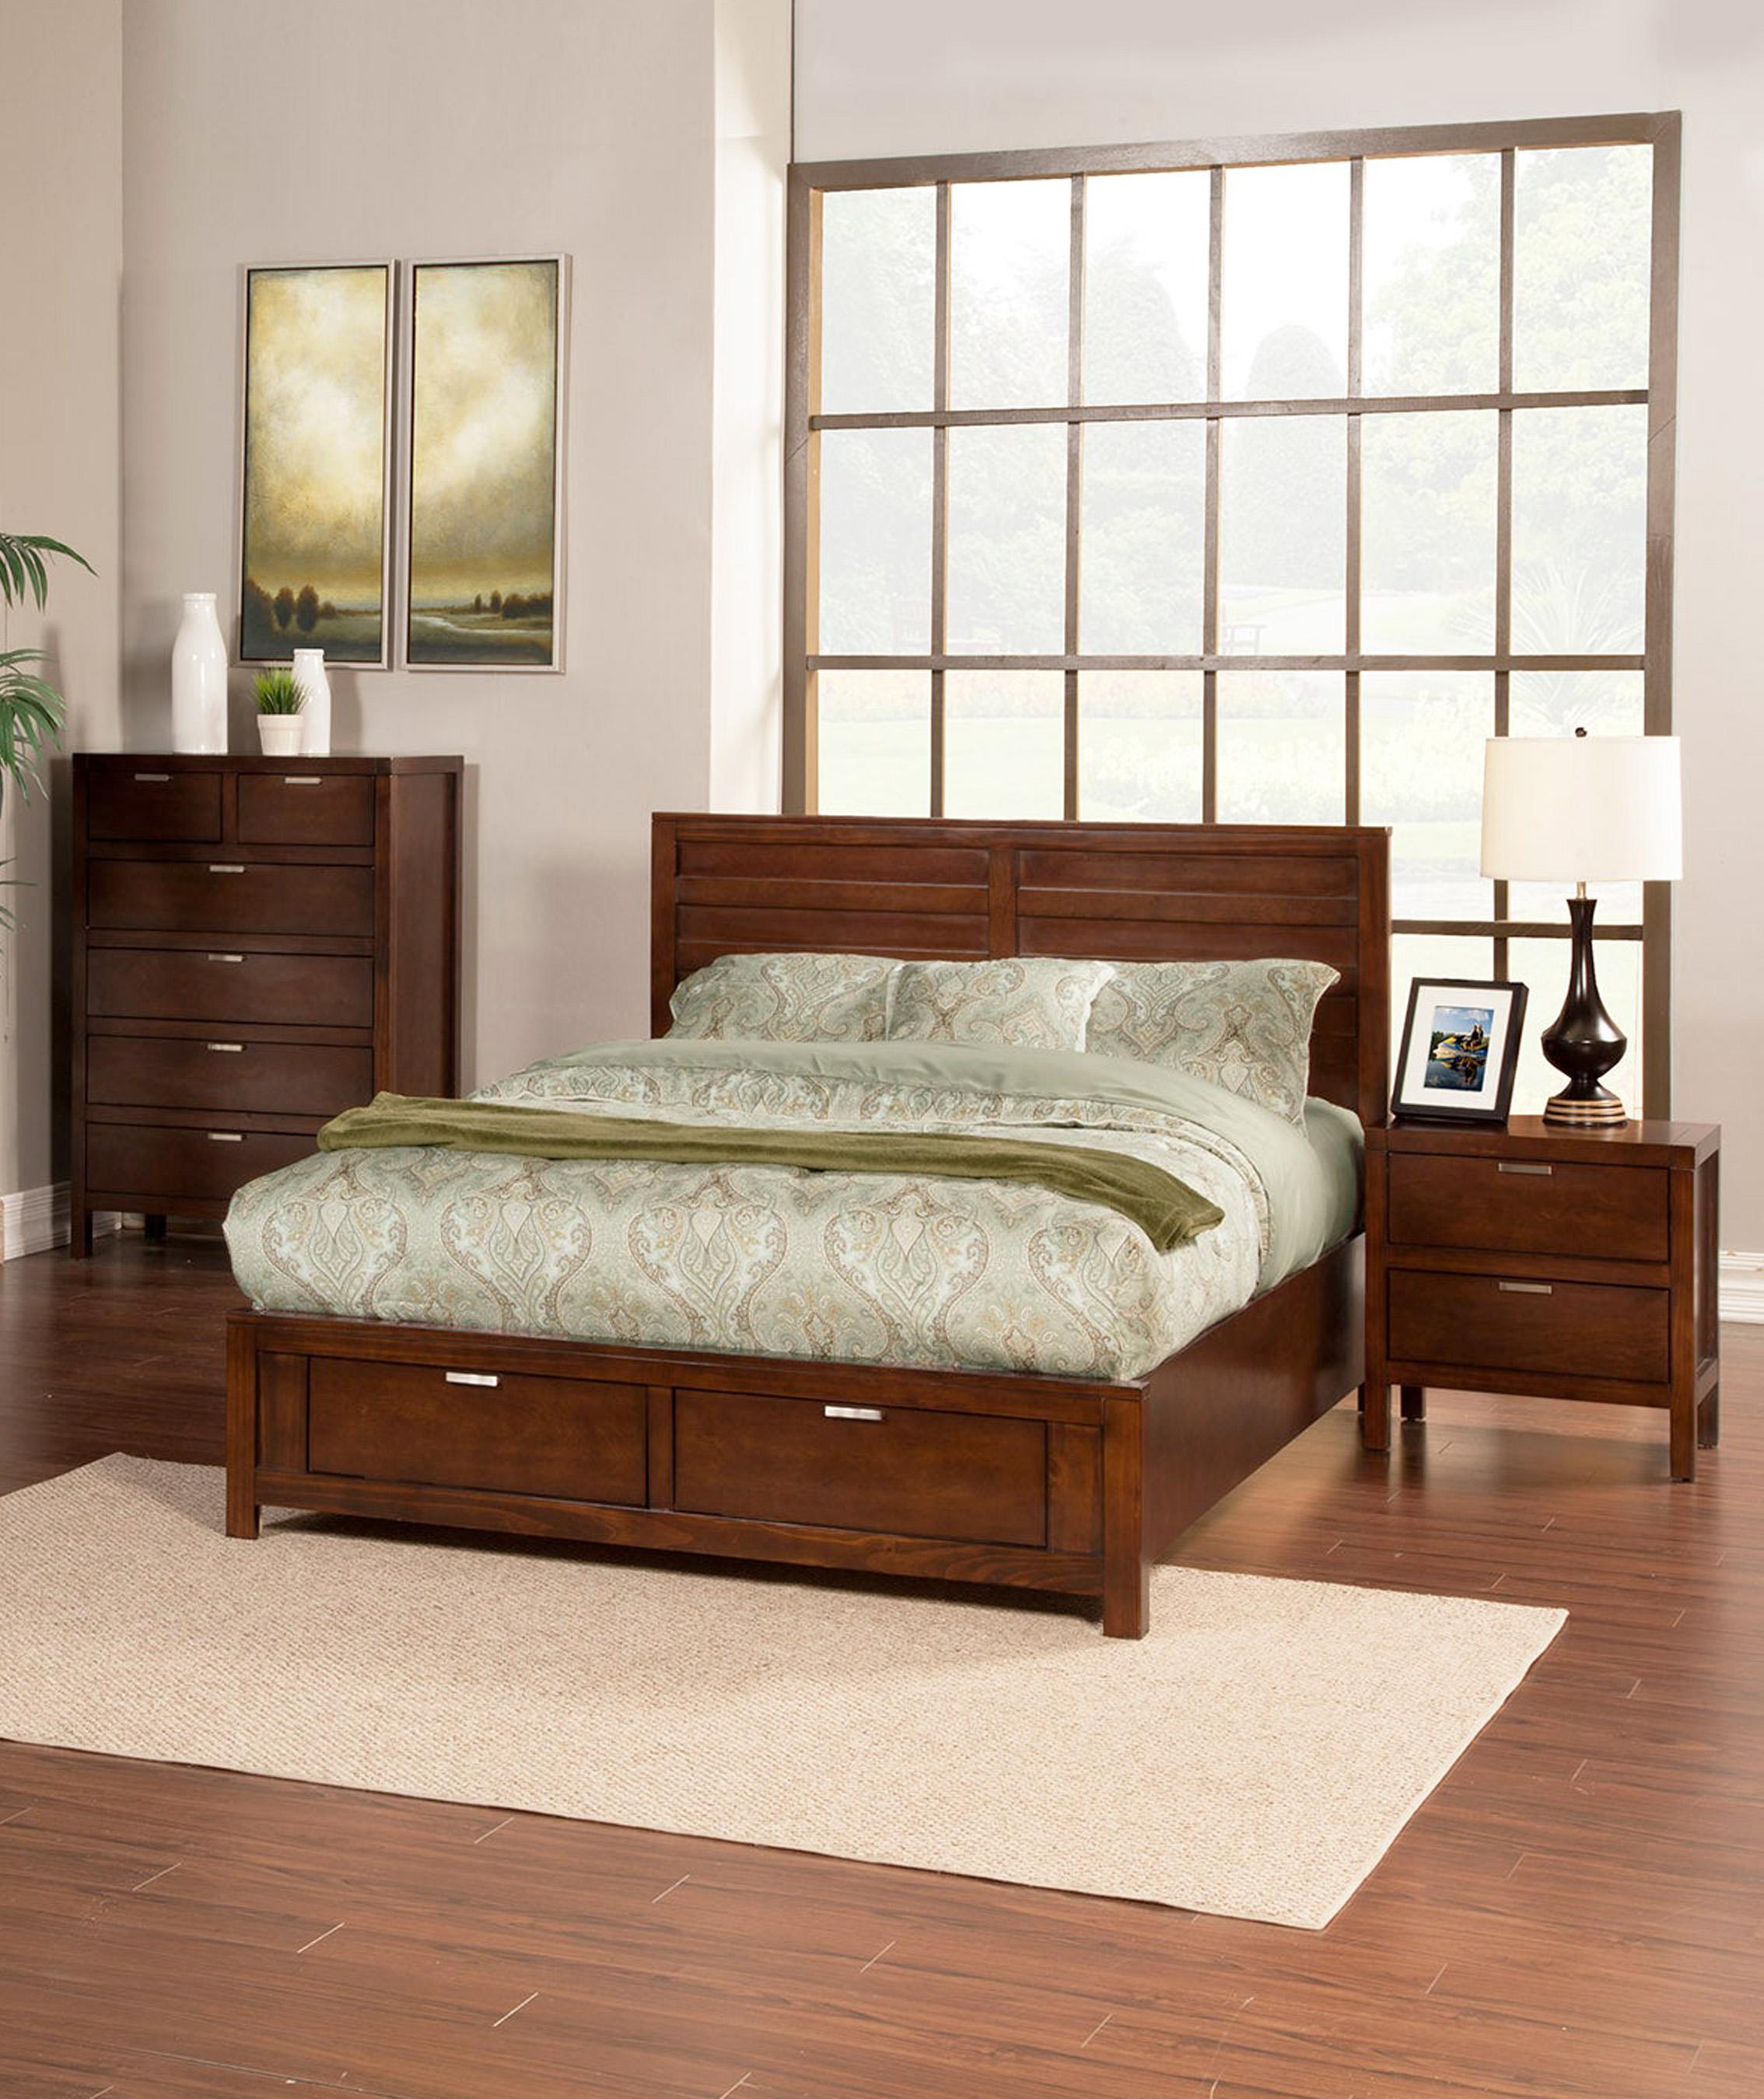 Modern, Traditional Storage Bed CARMEL JR-07CK in Cappuccino 